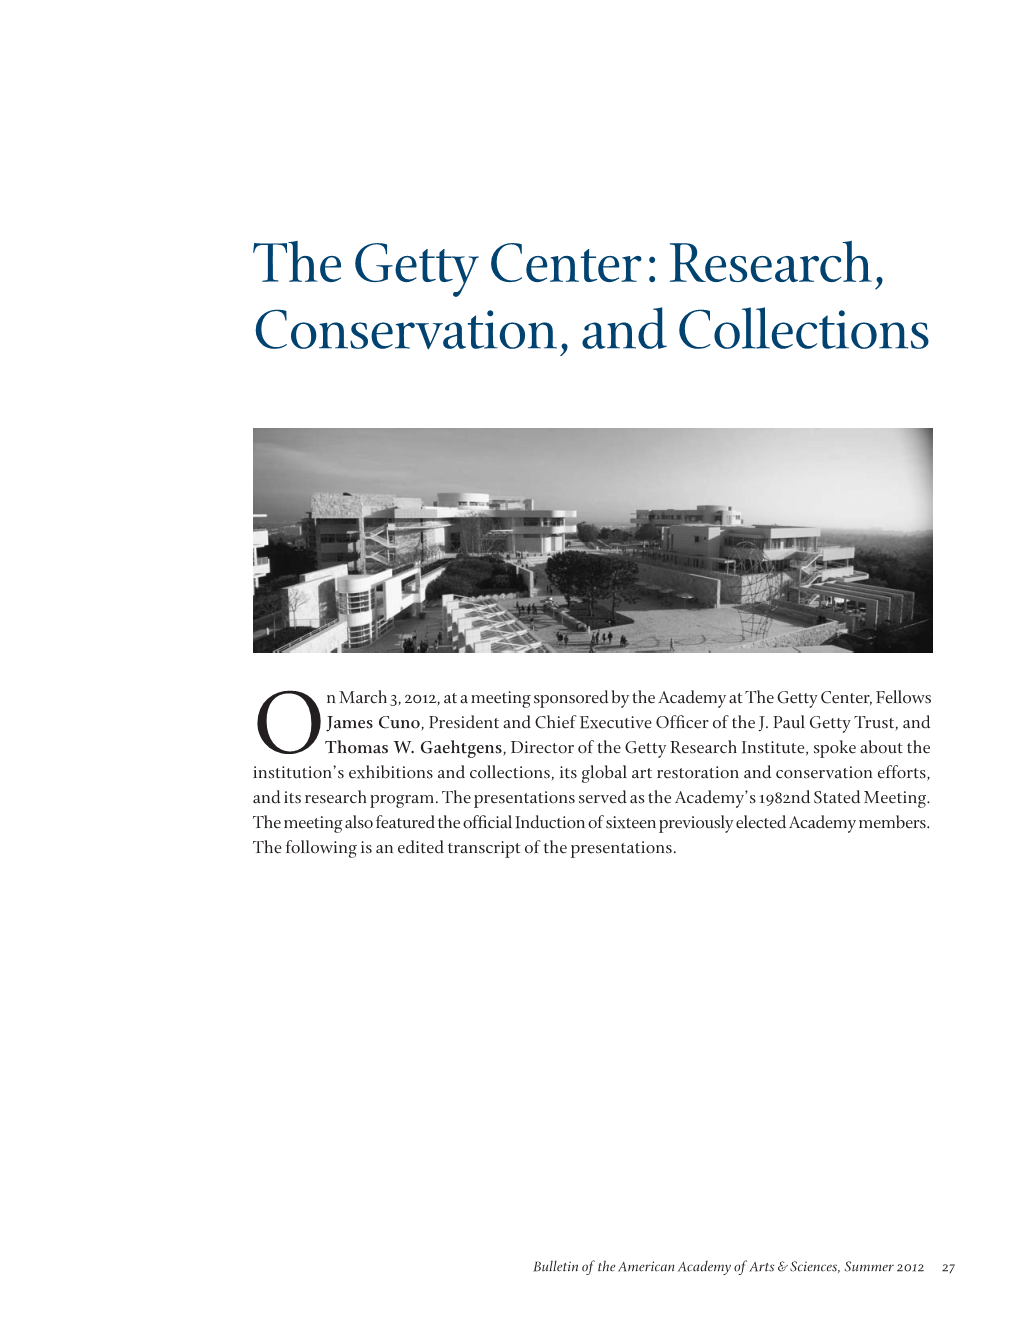 The Getty Center: Research, Conservation, and Collections